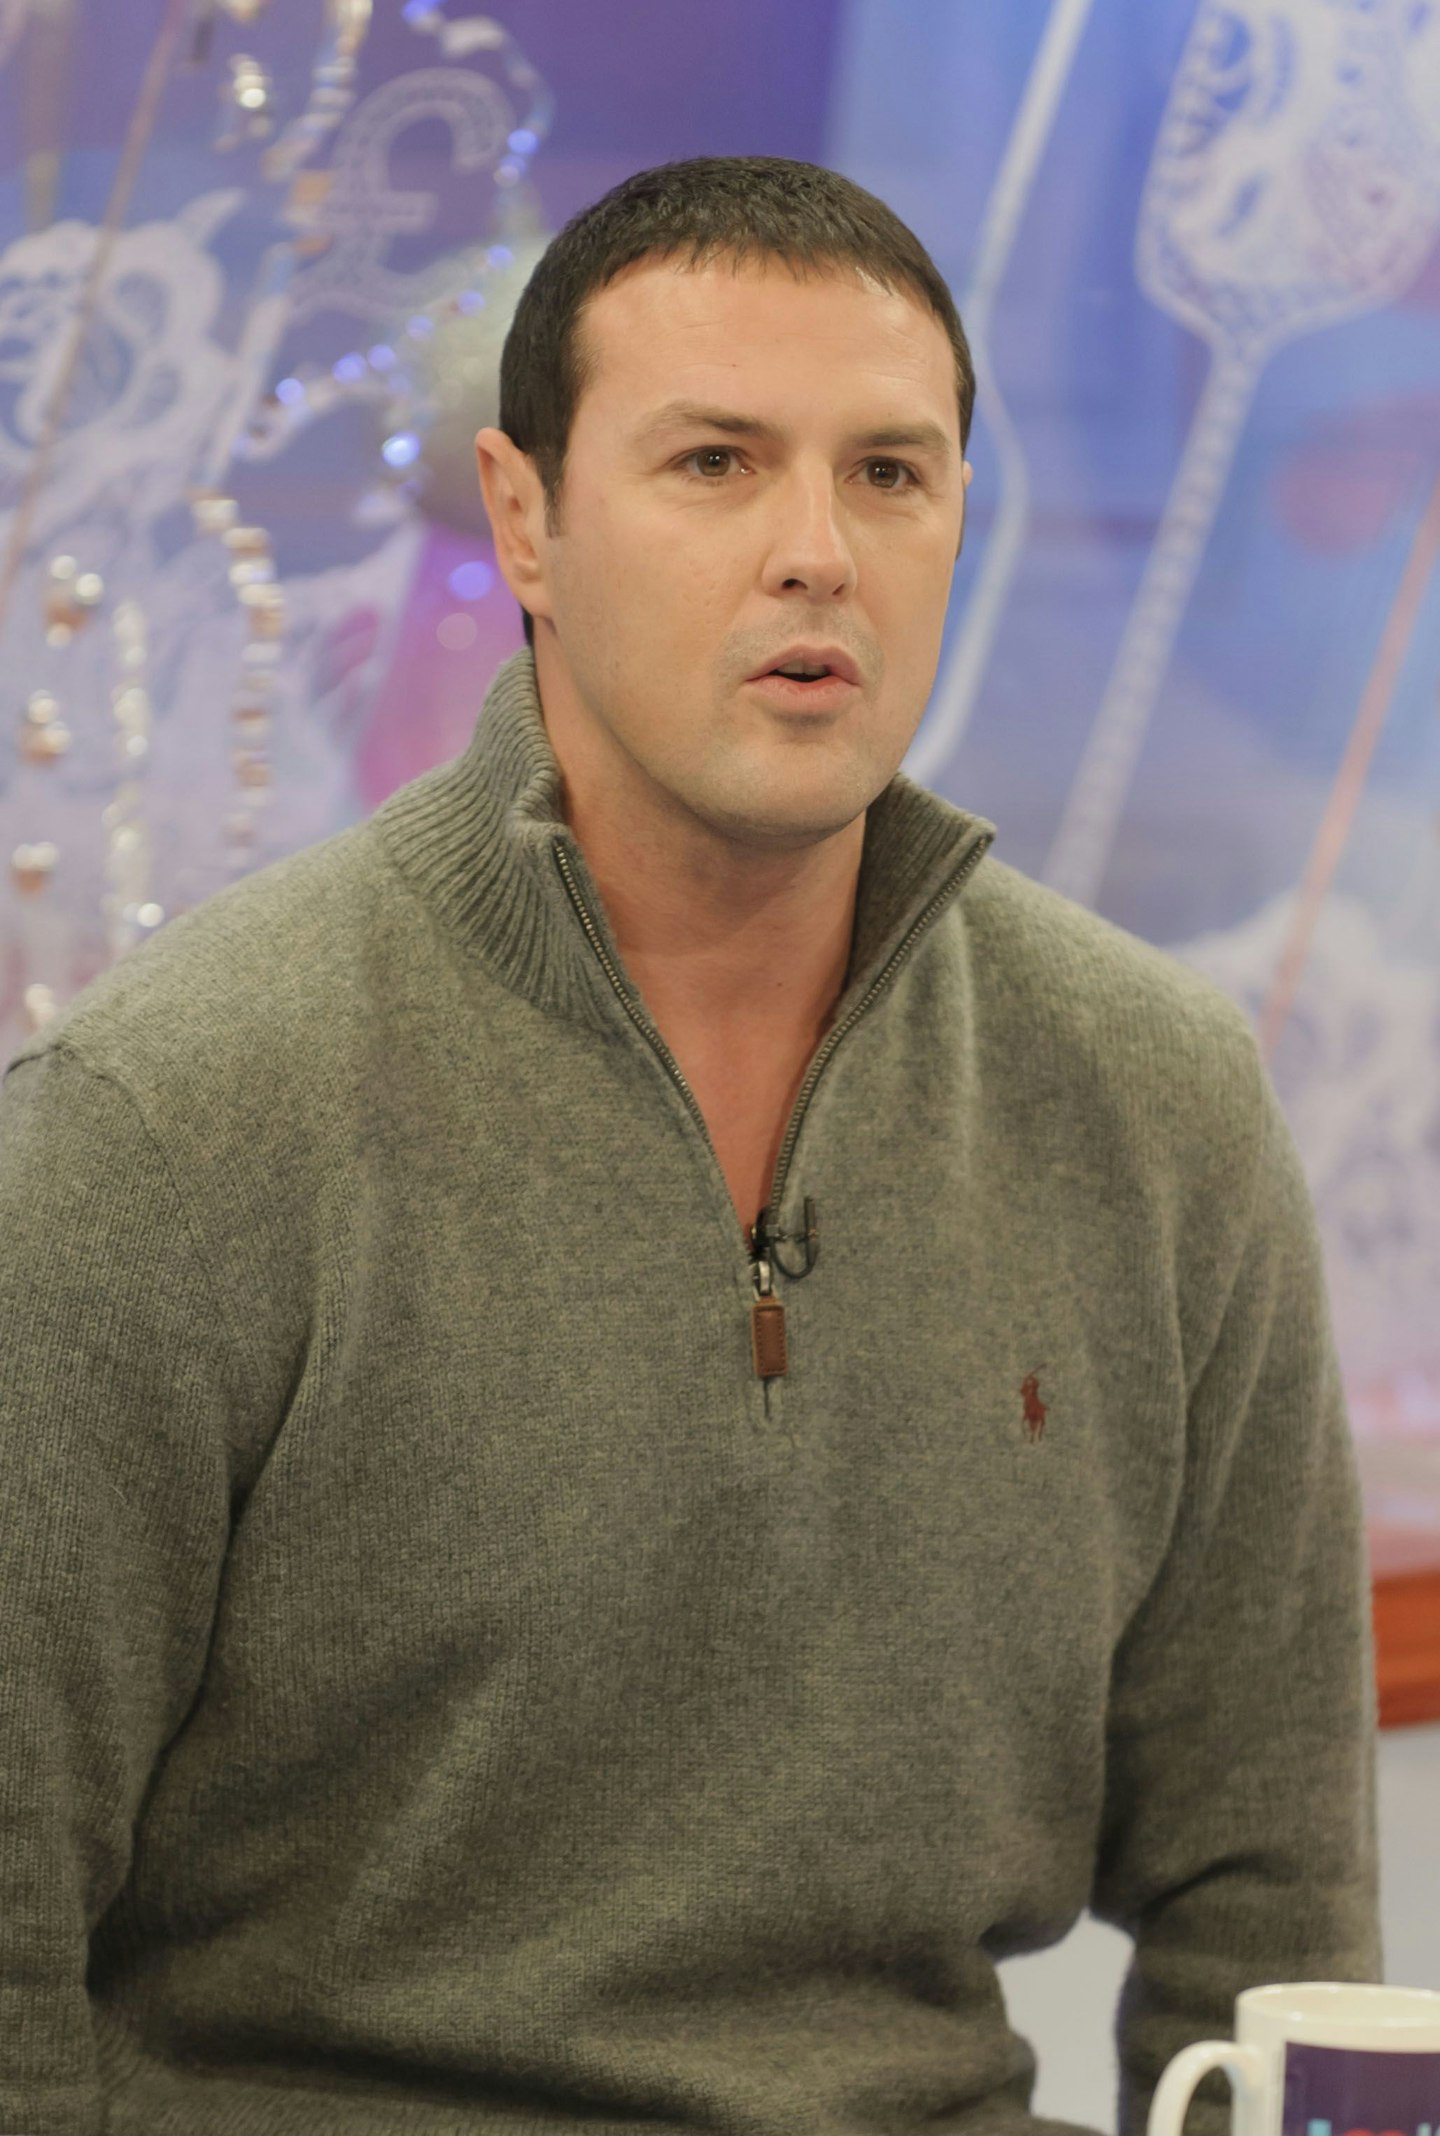 Paddy McGuinness before